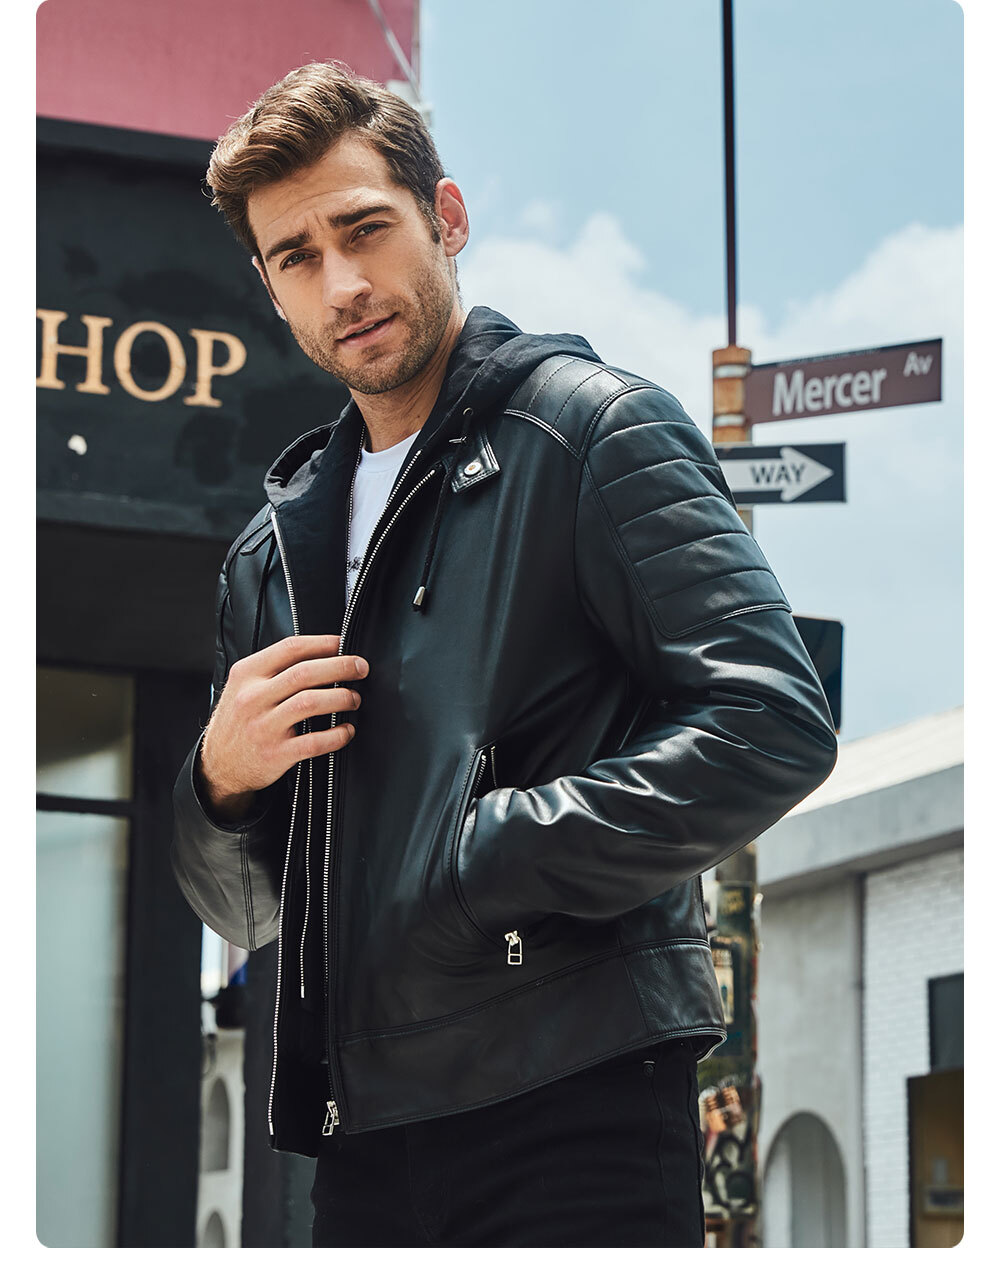 Fashion men's lambskin leather down jacket 100% polyester removable hooded leather  jacket